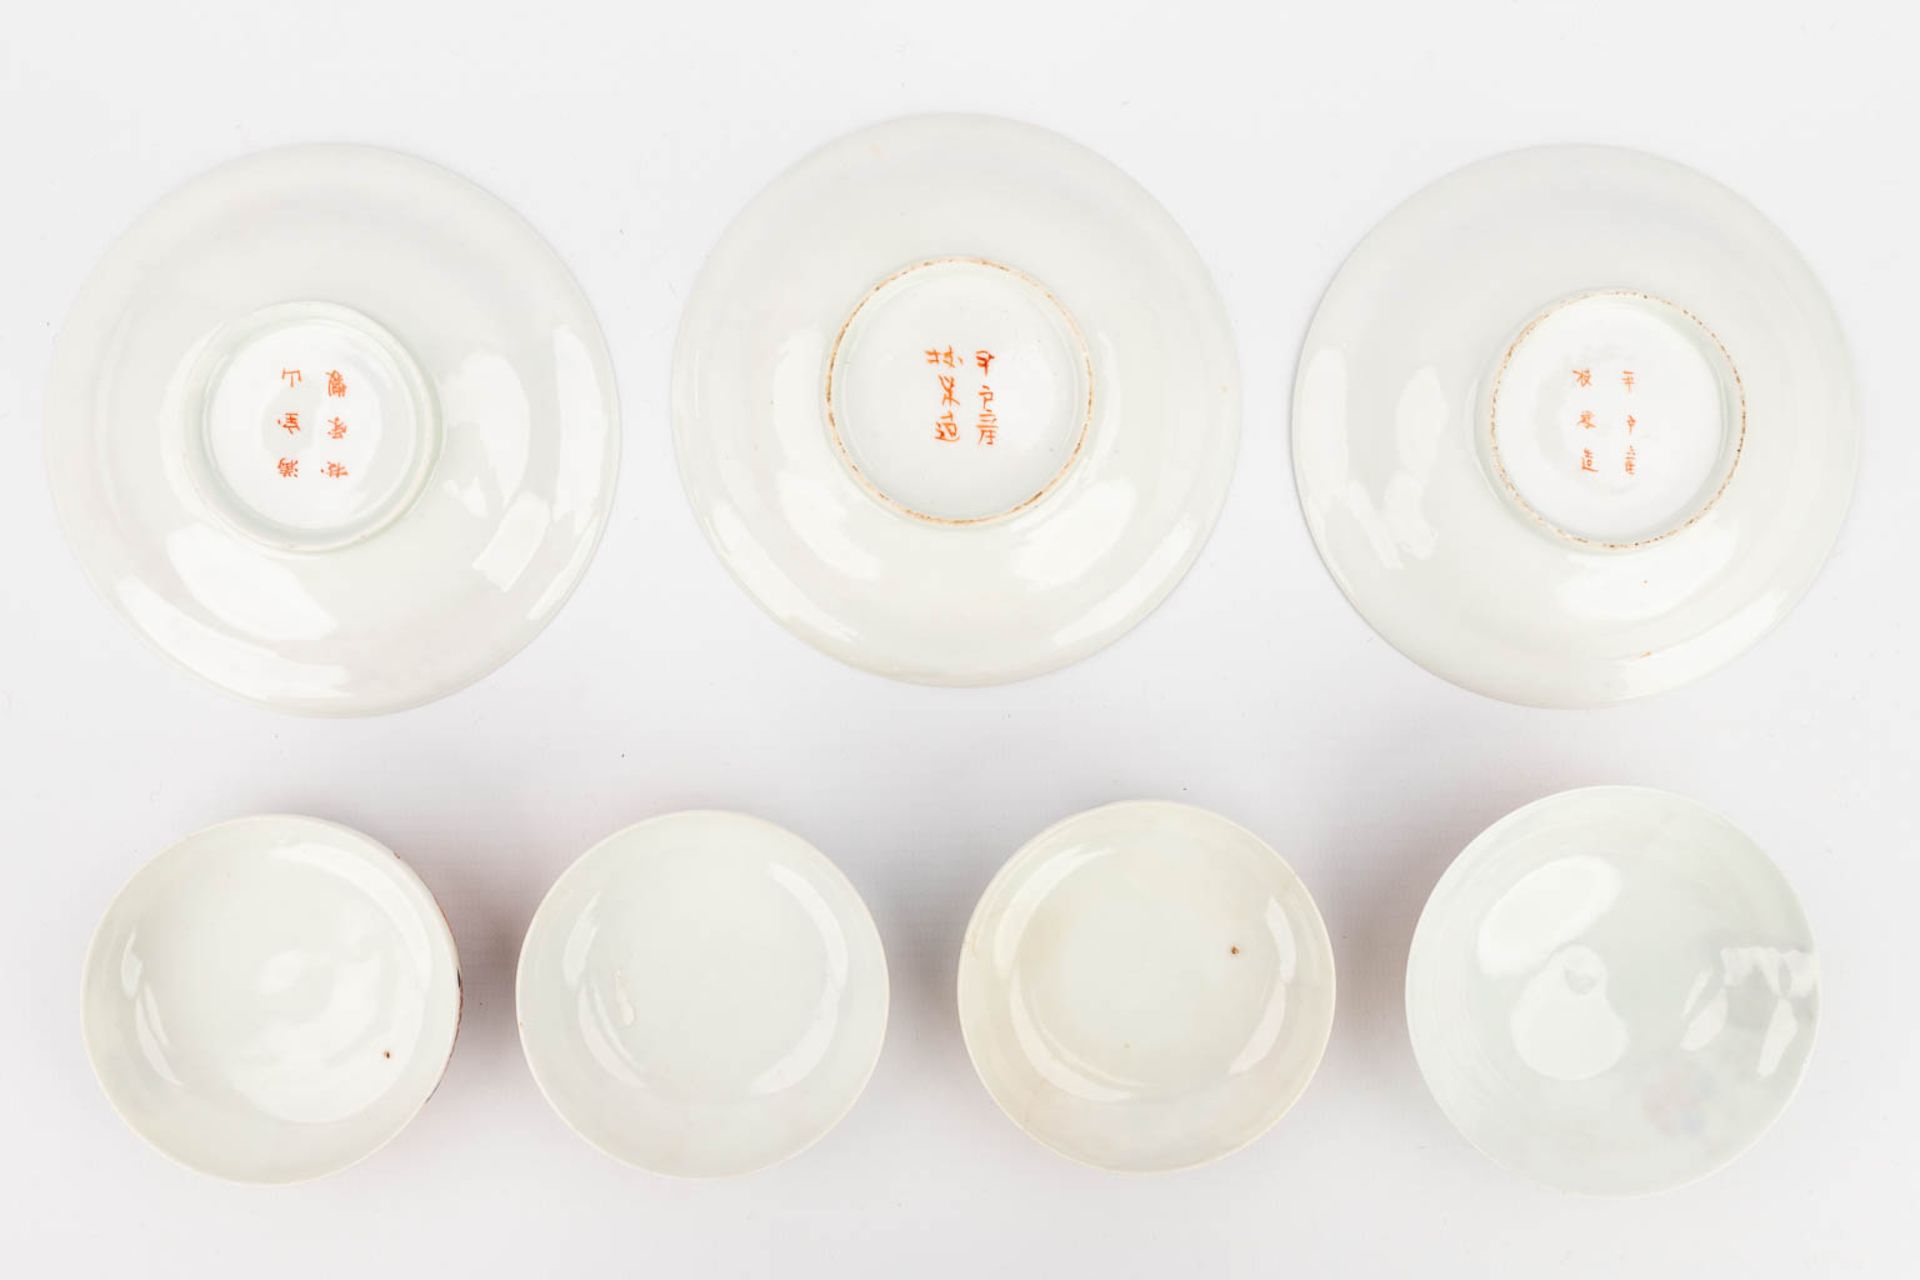 A large collection of bowls and saucers, eggshell porcelain, Japan, 20th C. (H:9 x D:9 cm) - Image 24 of 24